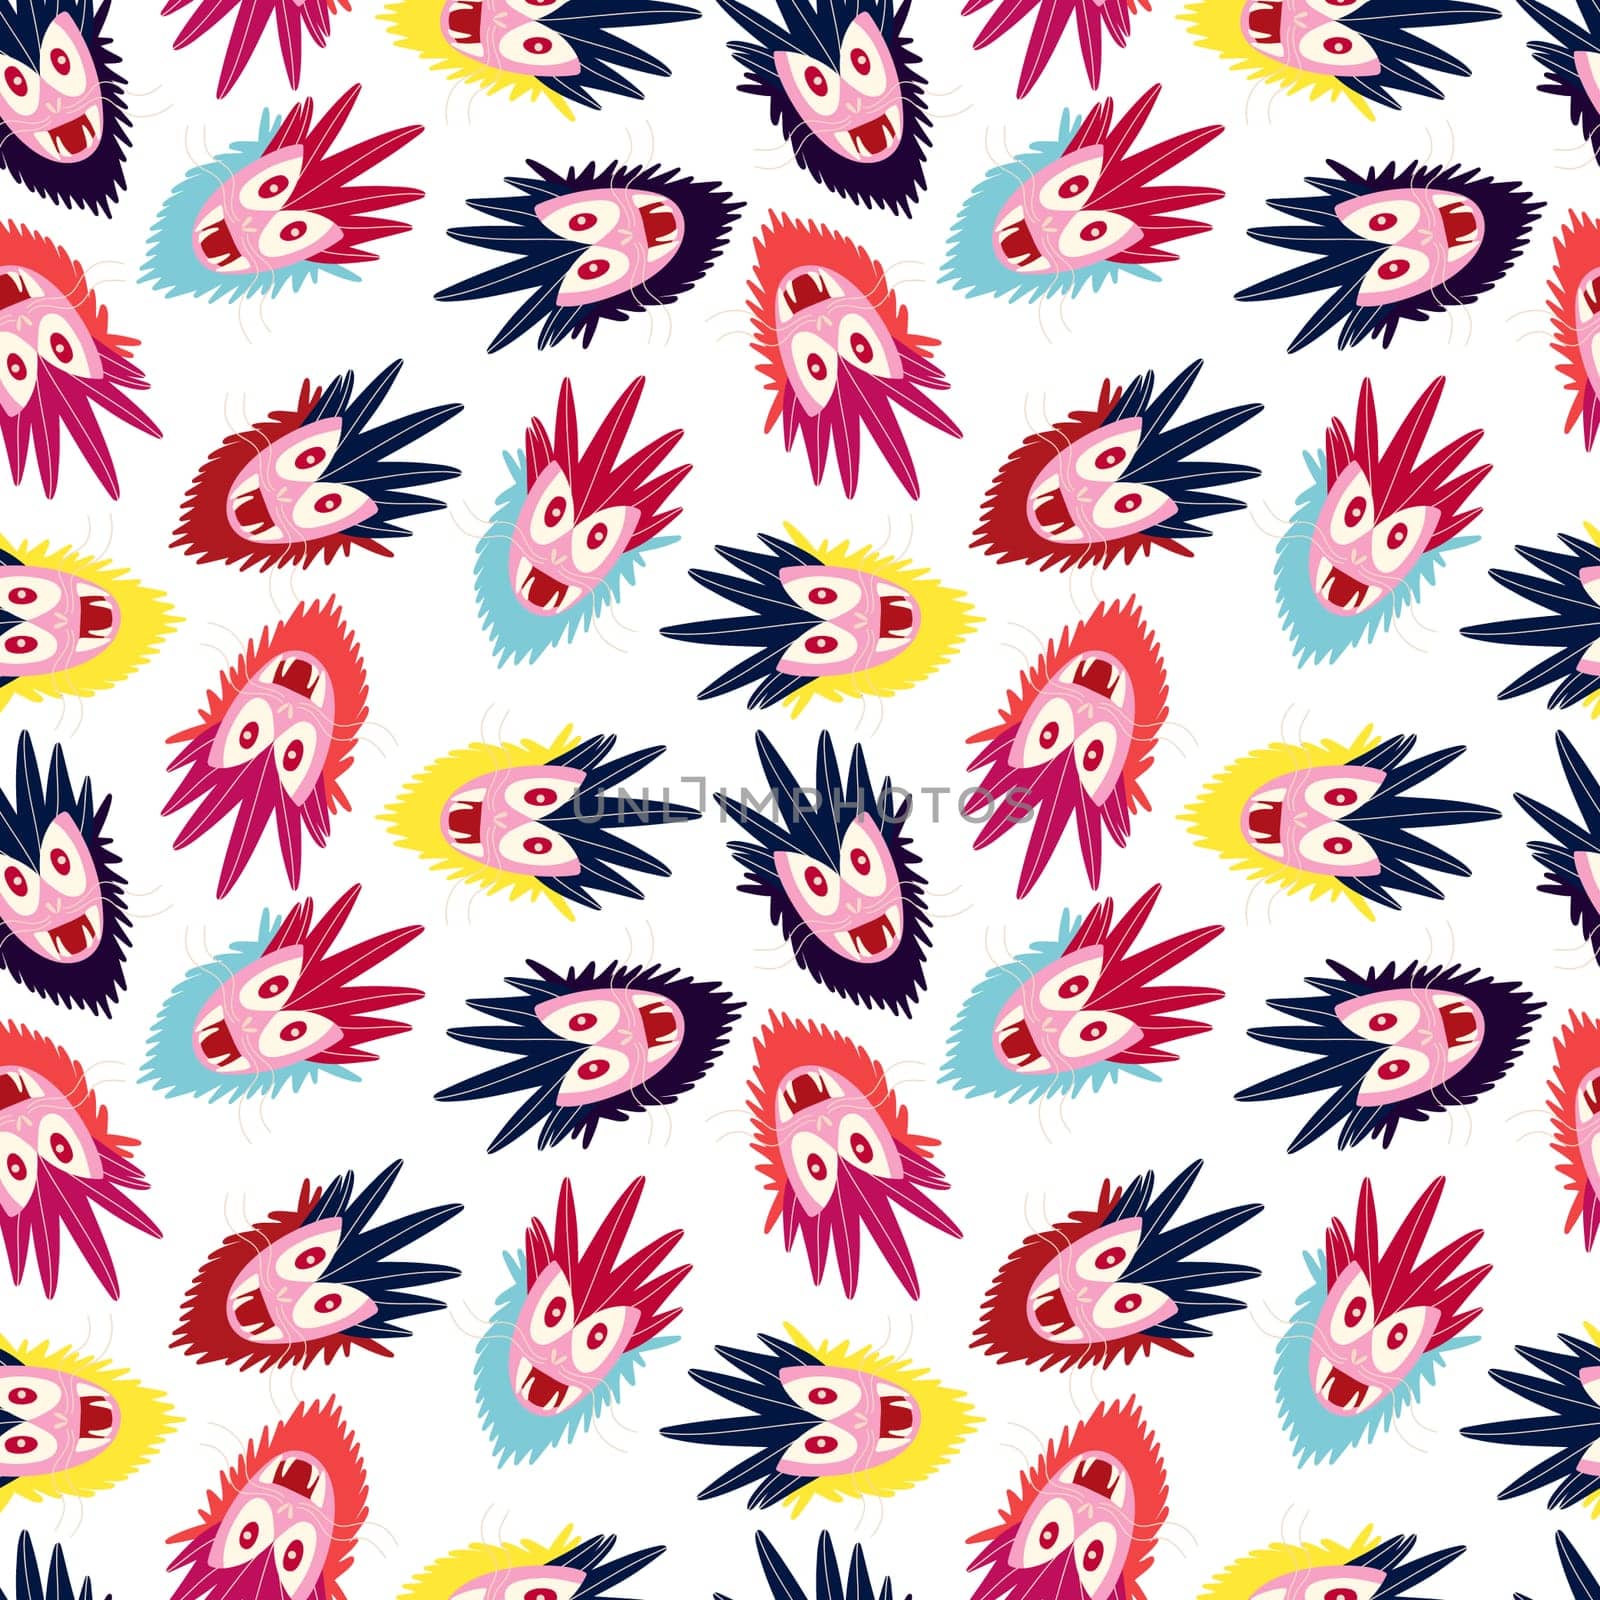 A blue and yellow pattern of cartoon faces with red eyes and mouths by Dustick